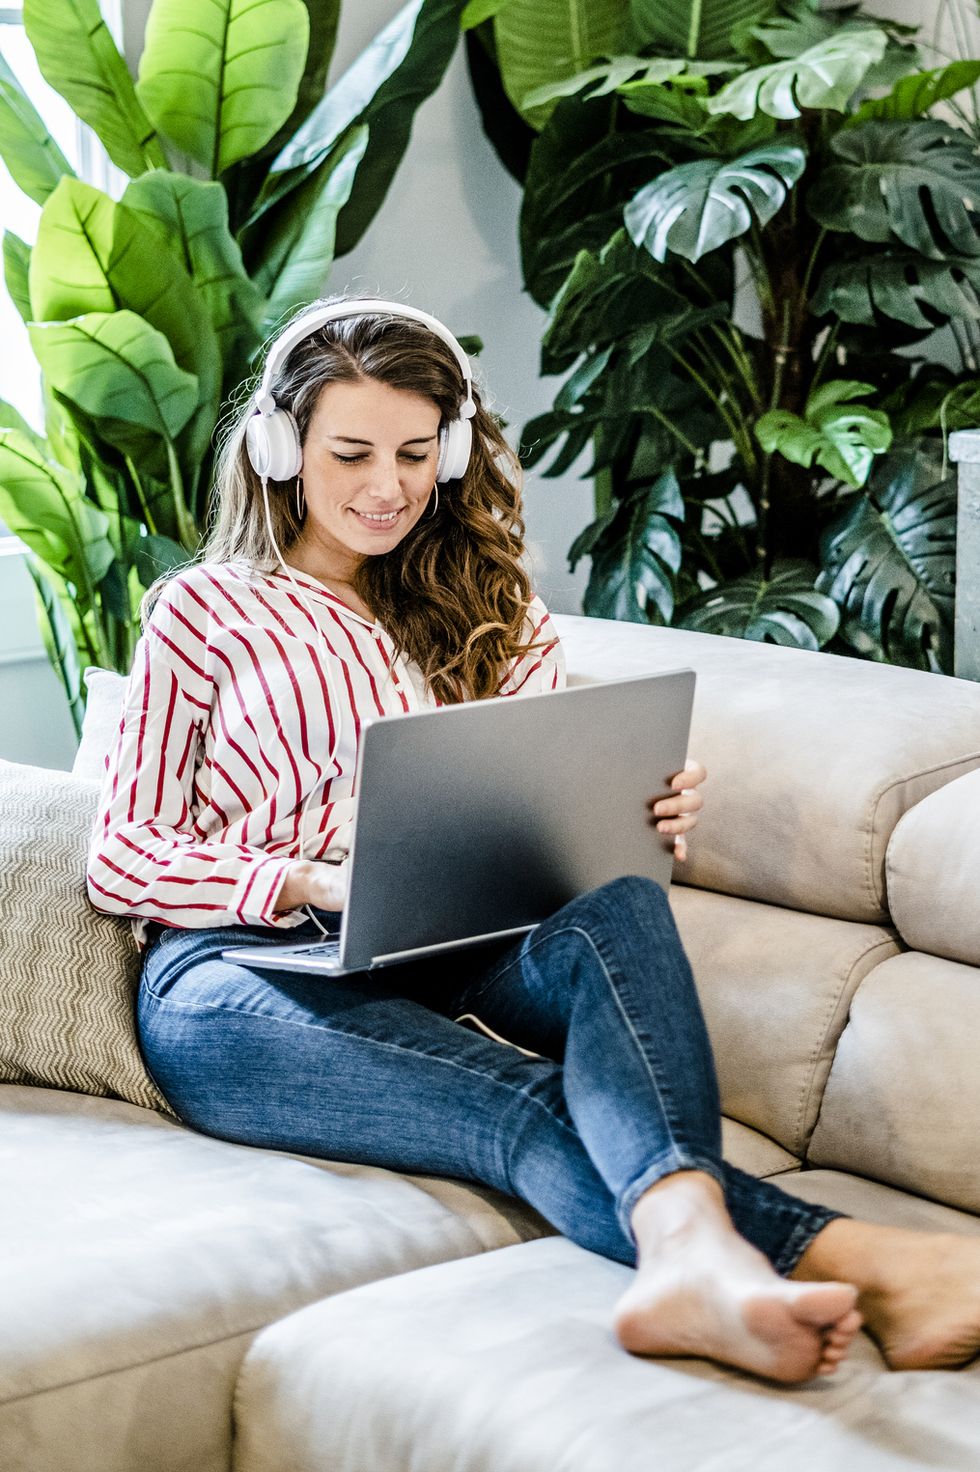 games to play on zoom - Smiling woman with laptop and headphones sitting on couch